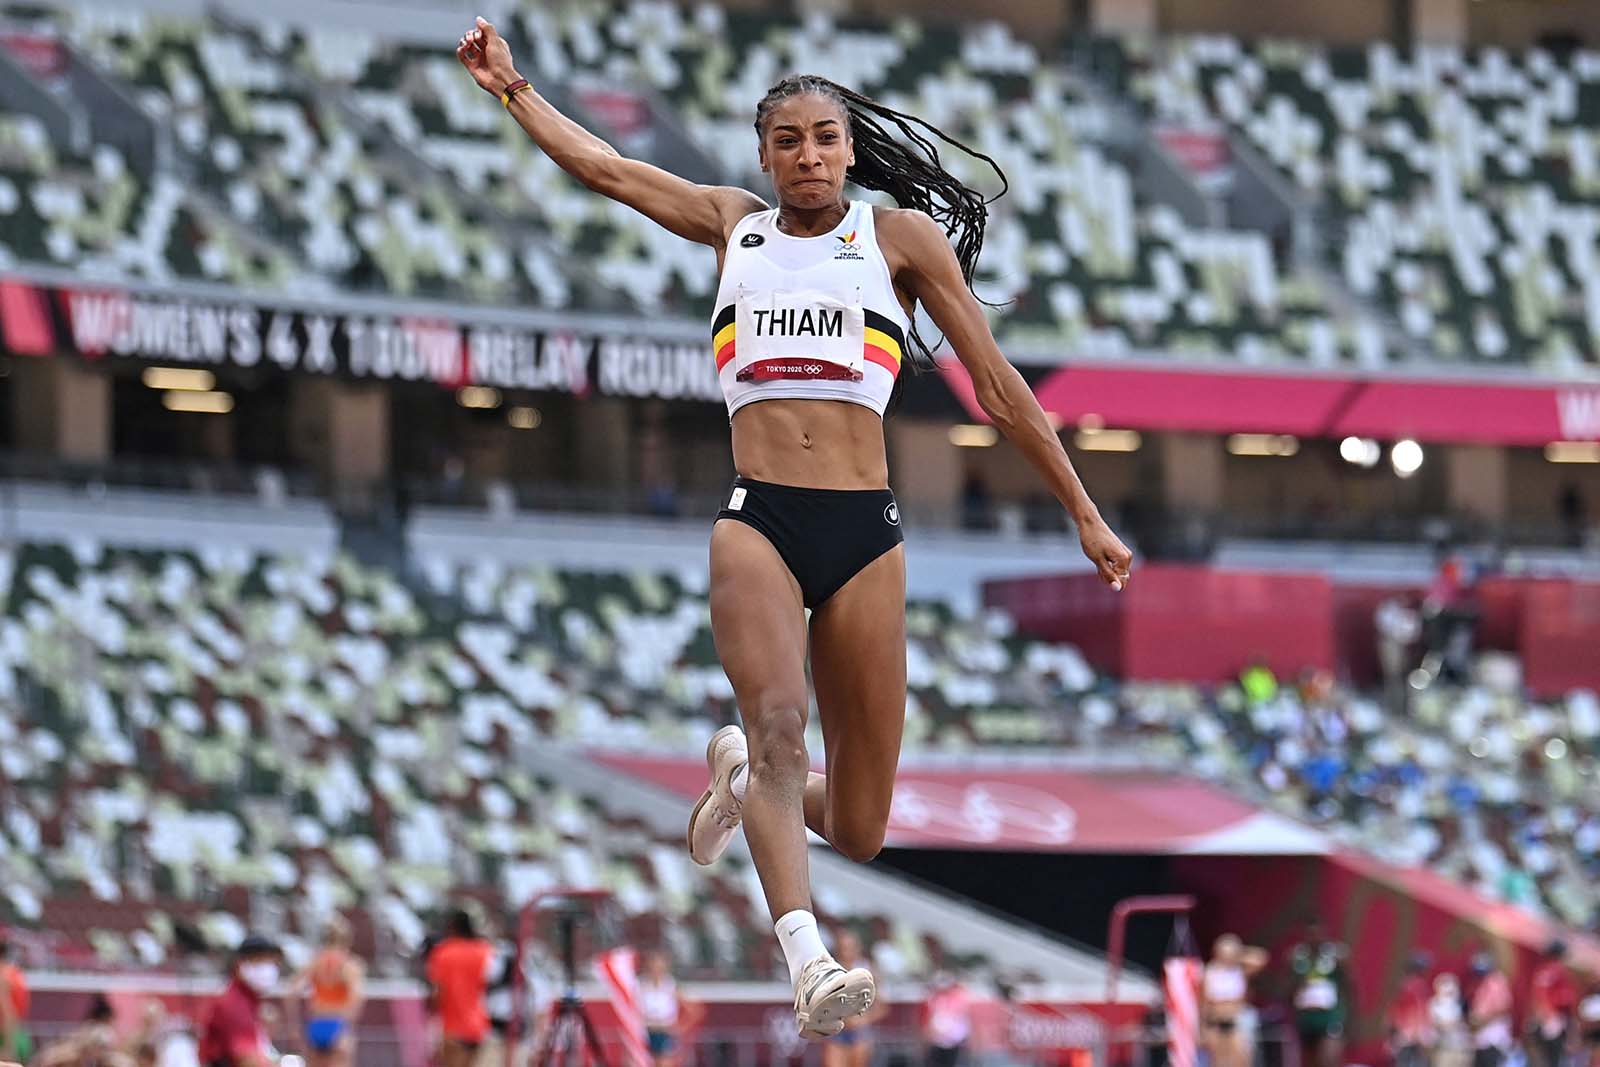 Belgium's Nafissatou Thiam competes in the women's heptathlon long jump on August 5.